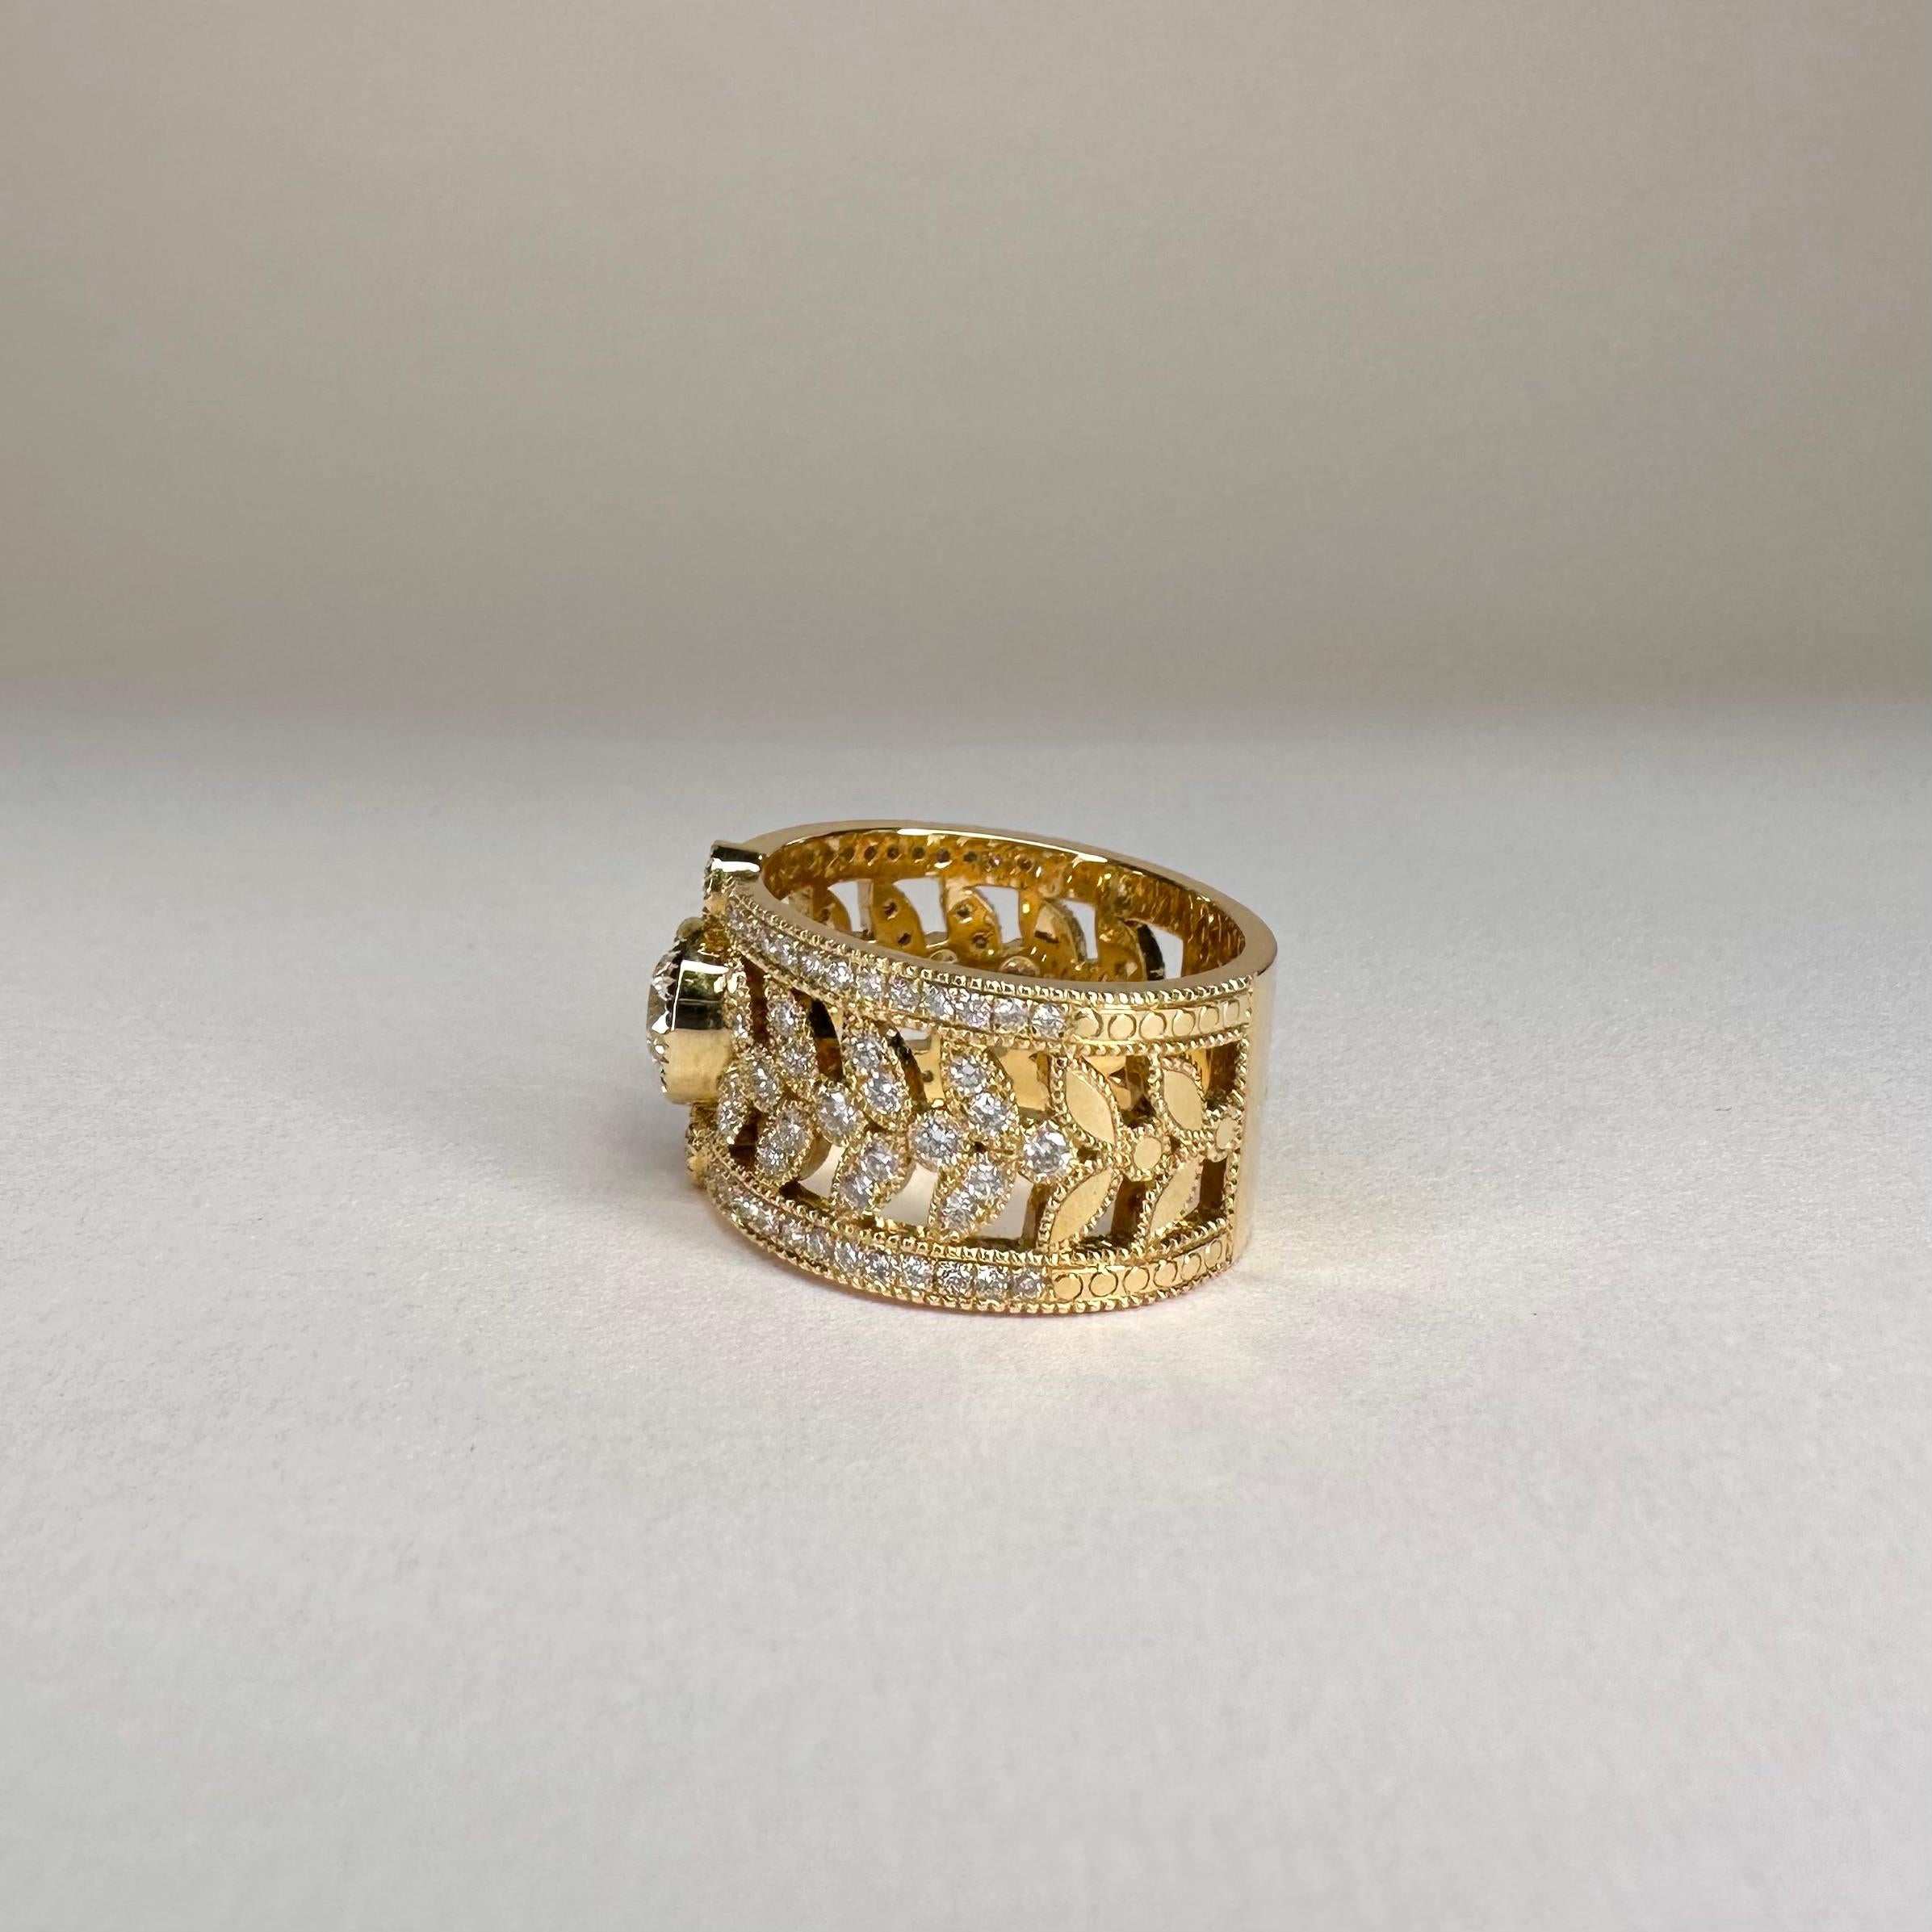 For Sale:  18k Yellow Gold Band Ring 0.70 Carat Diamond GIA Certified and 1 Cts of Diamonds 5